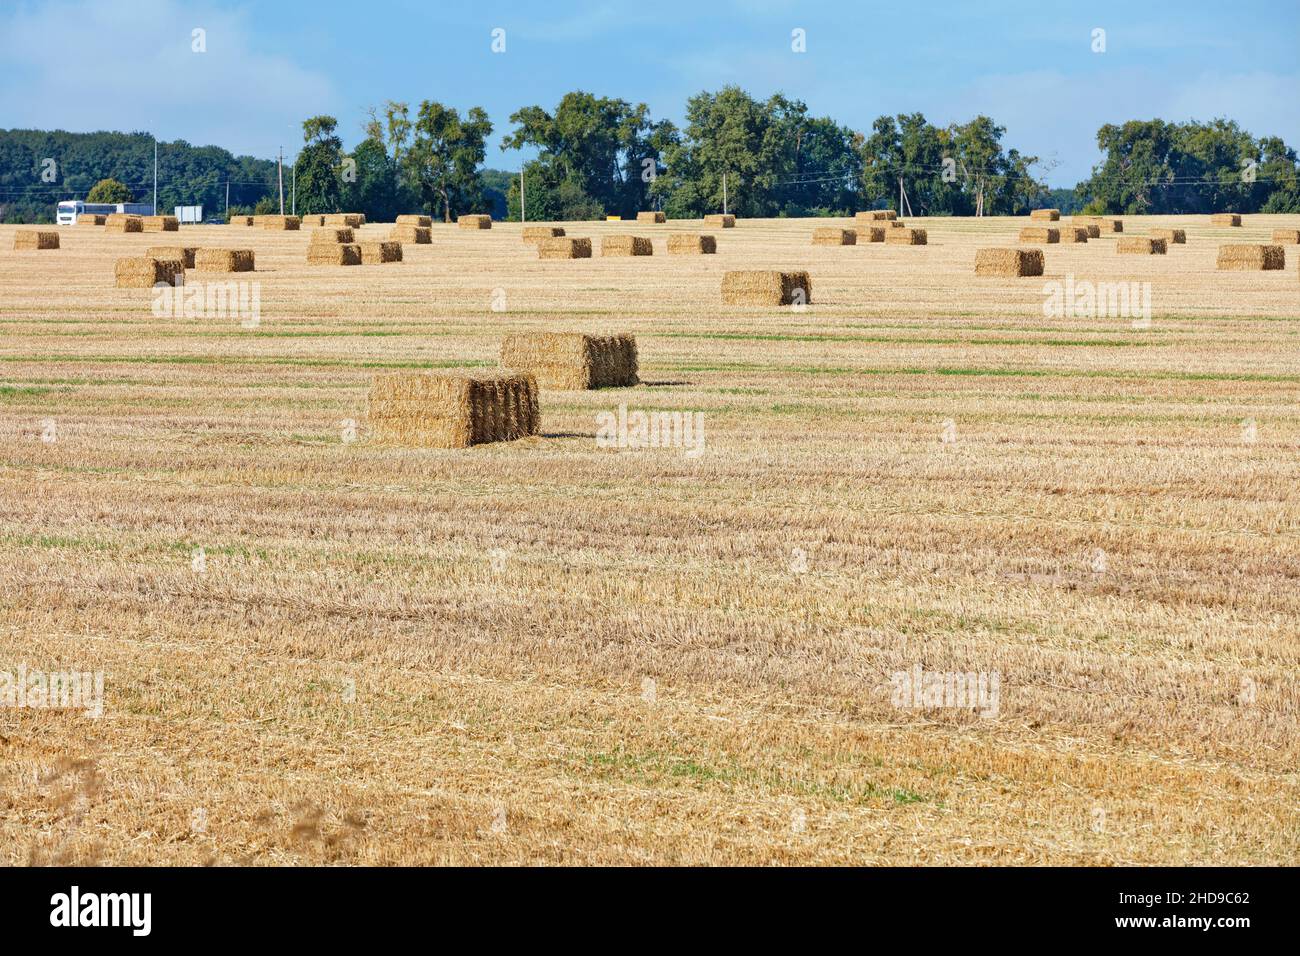 Large rectangular bales of straw are strewn across a wide field on a bright summer day. Copy space. Stock Photo